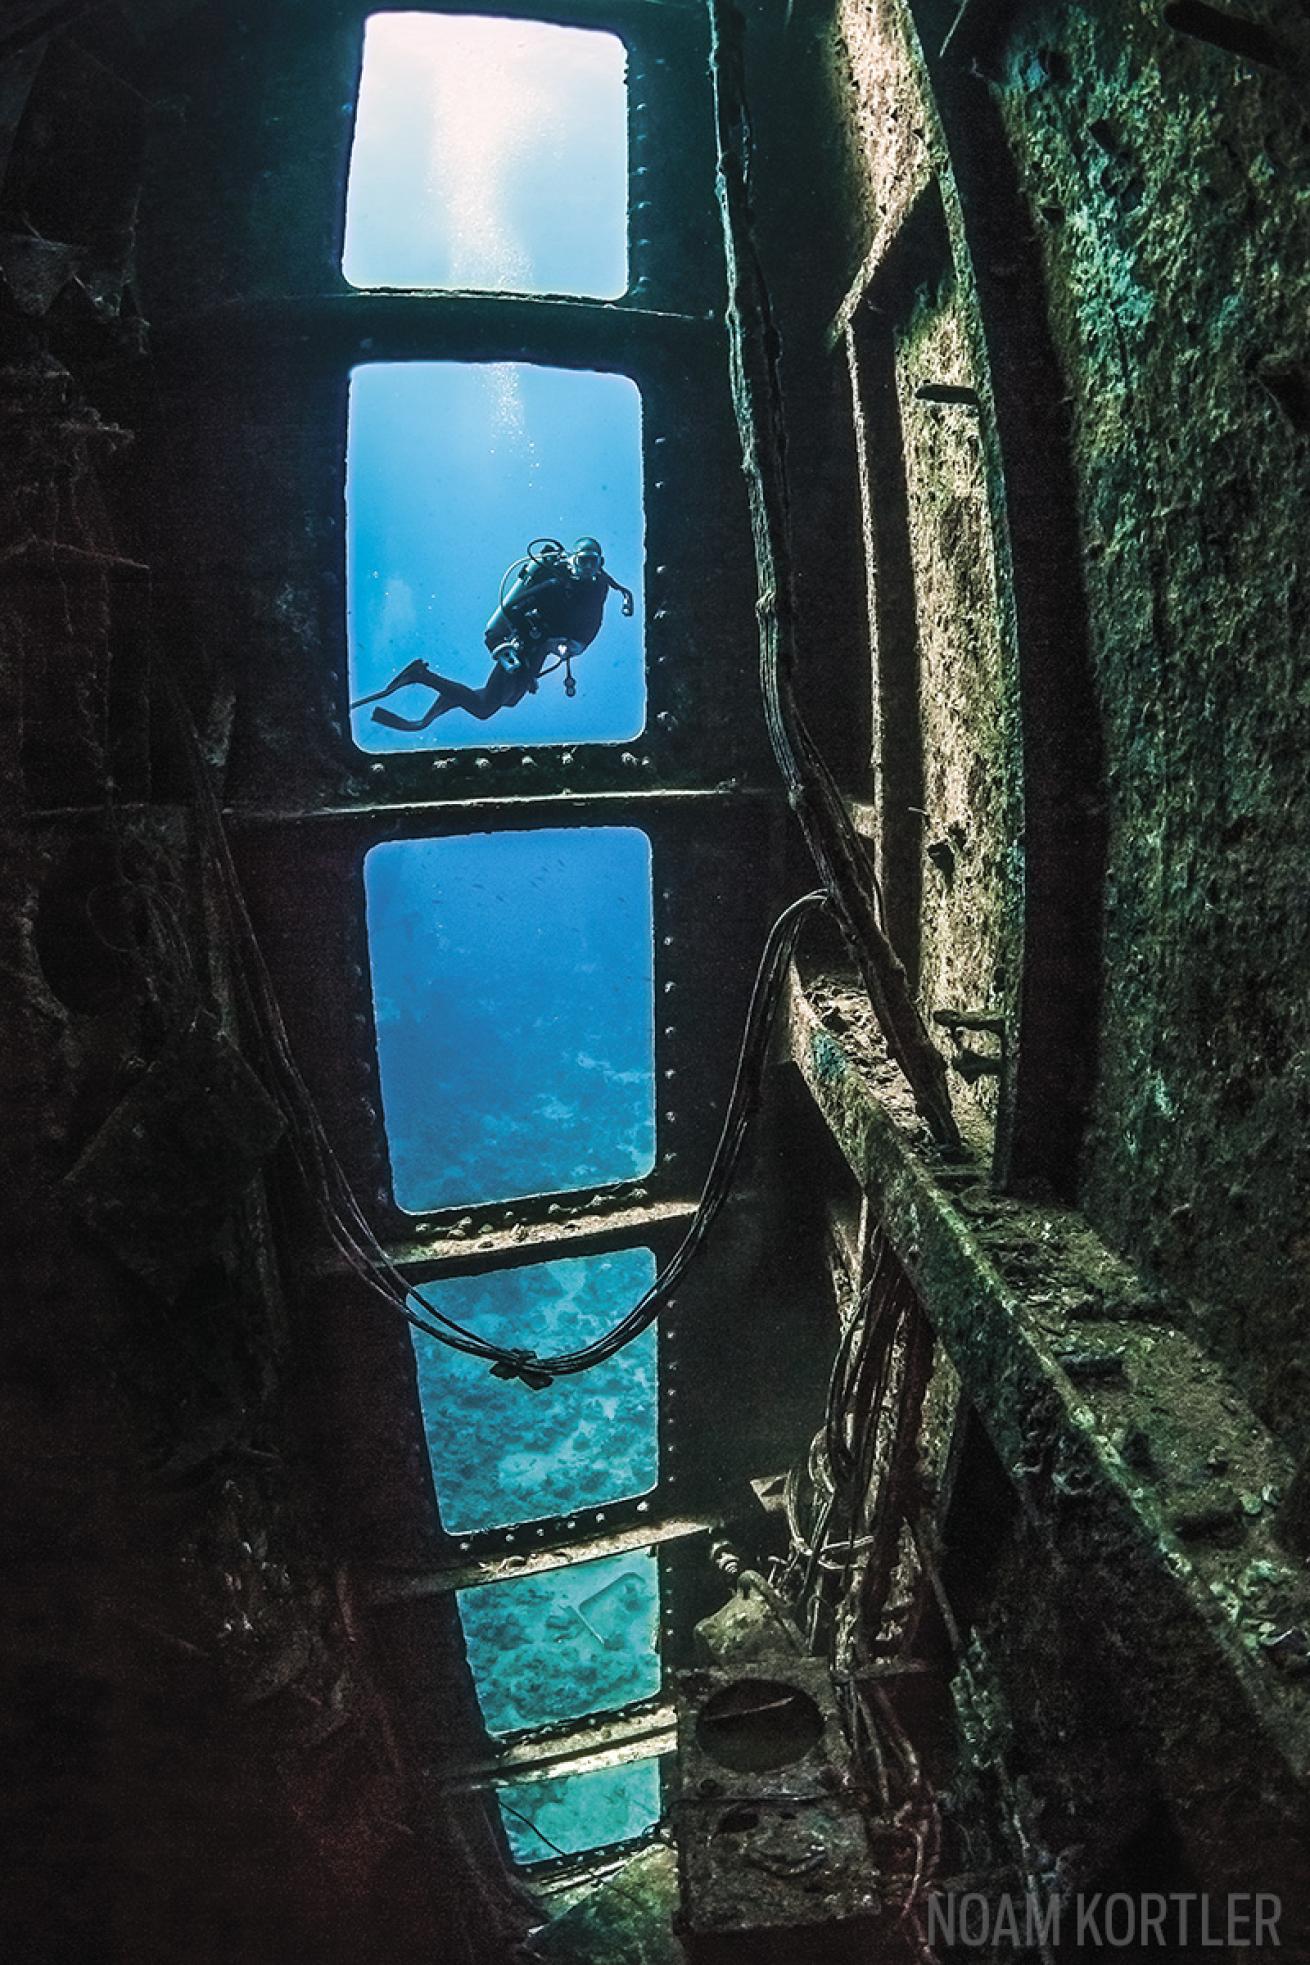 Salem Express wreck and diver in Red Sea, Egypt